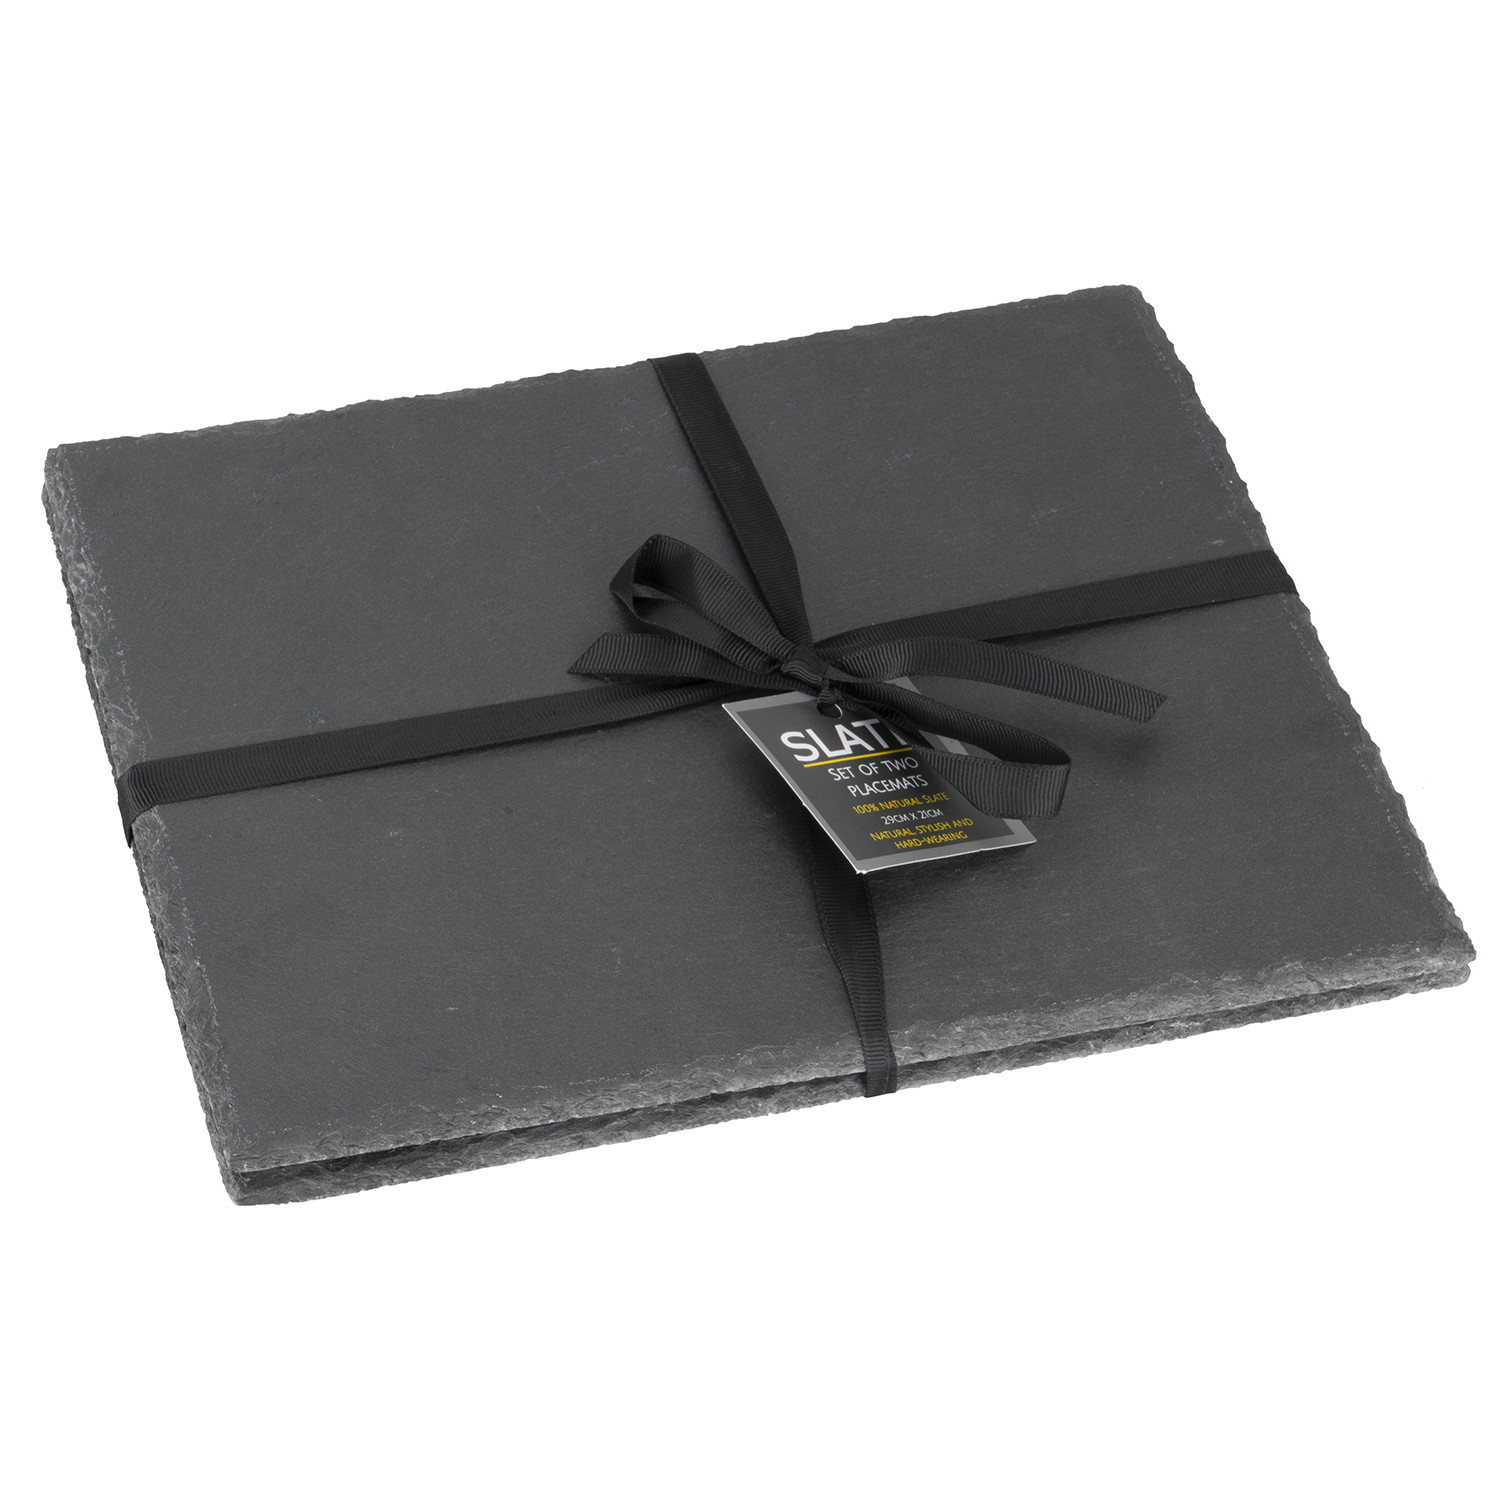  Slate Black Rough Edge Placemats 2 Pack Image 1